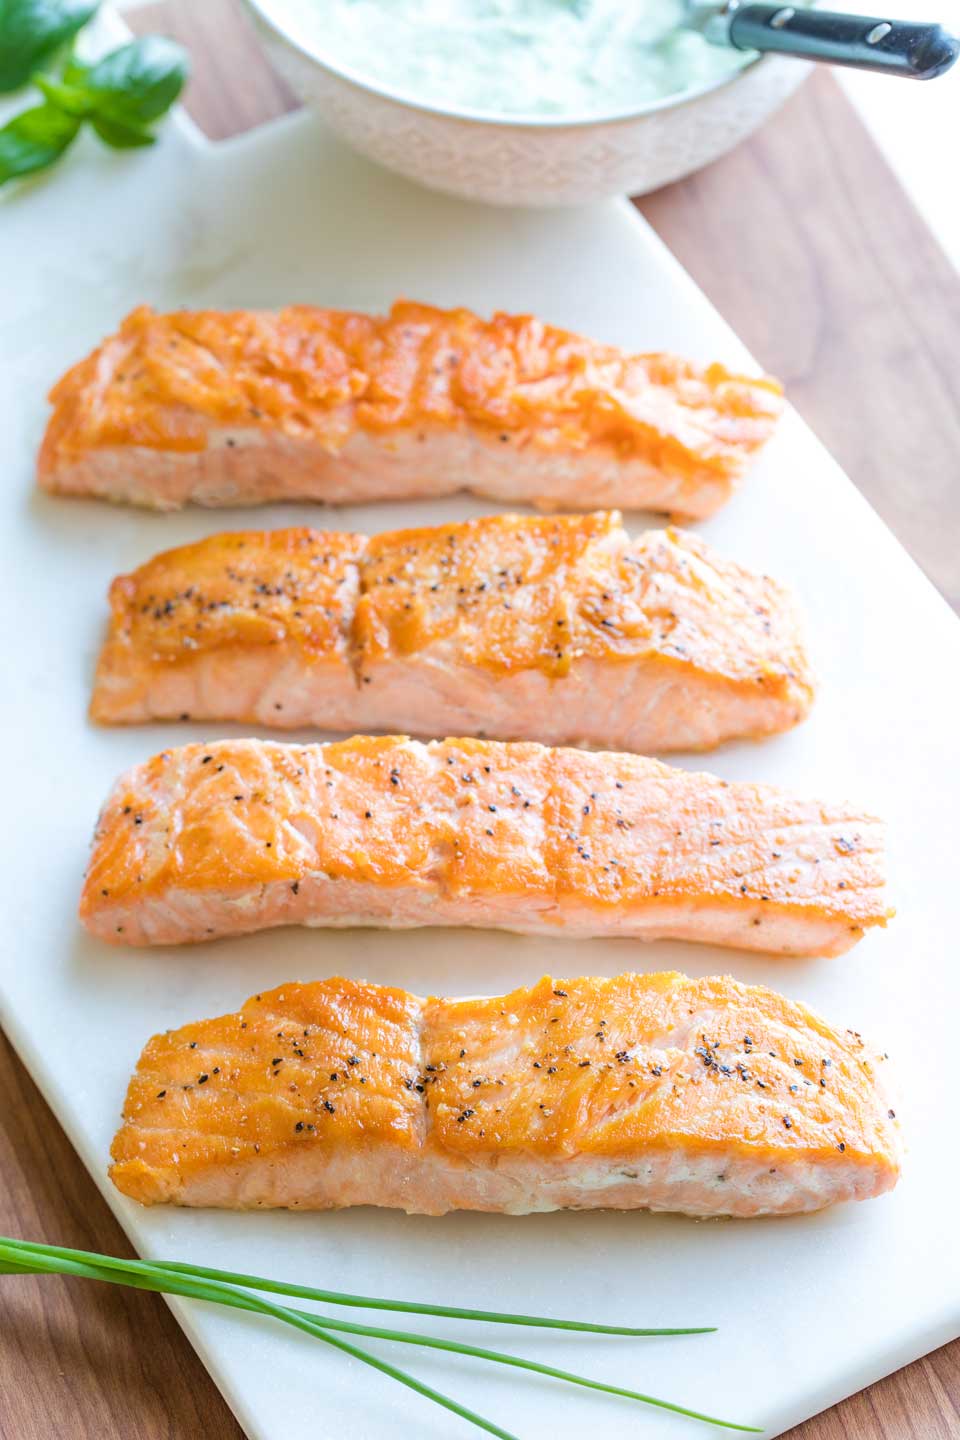 Four seared salmon filets after they've been removed from the fry pan, laying on a white marble serving slab before being served with sauce.